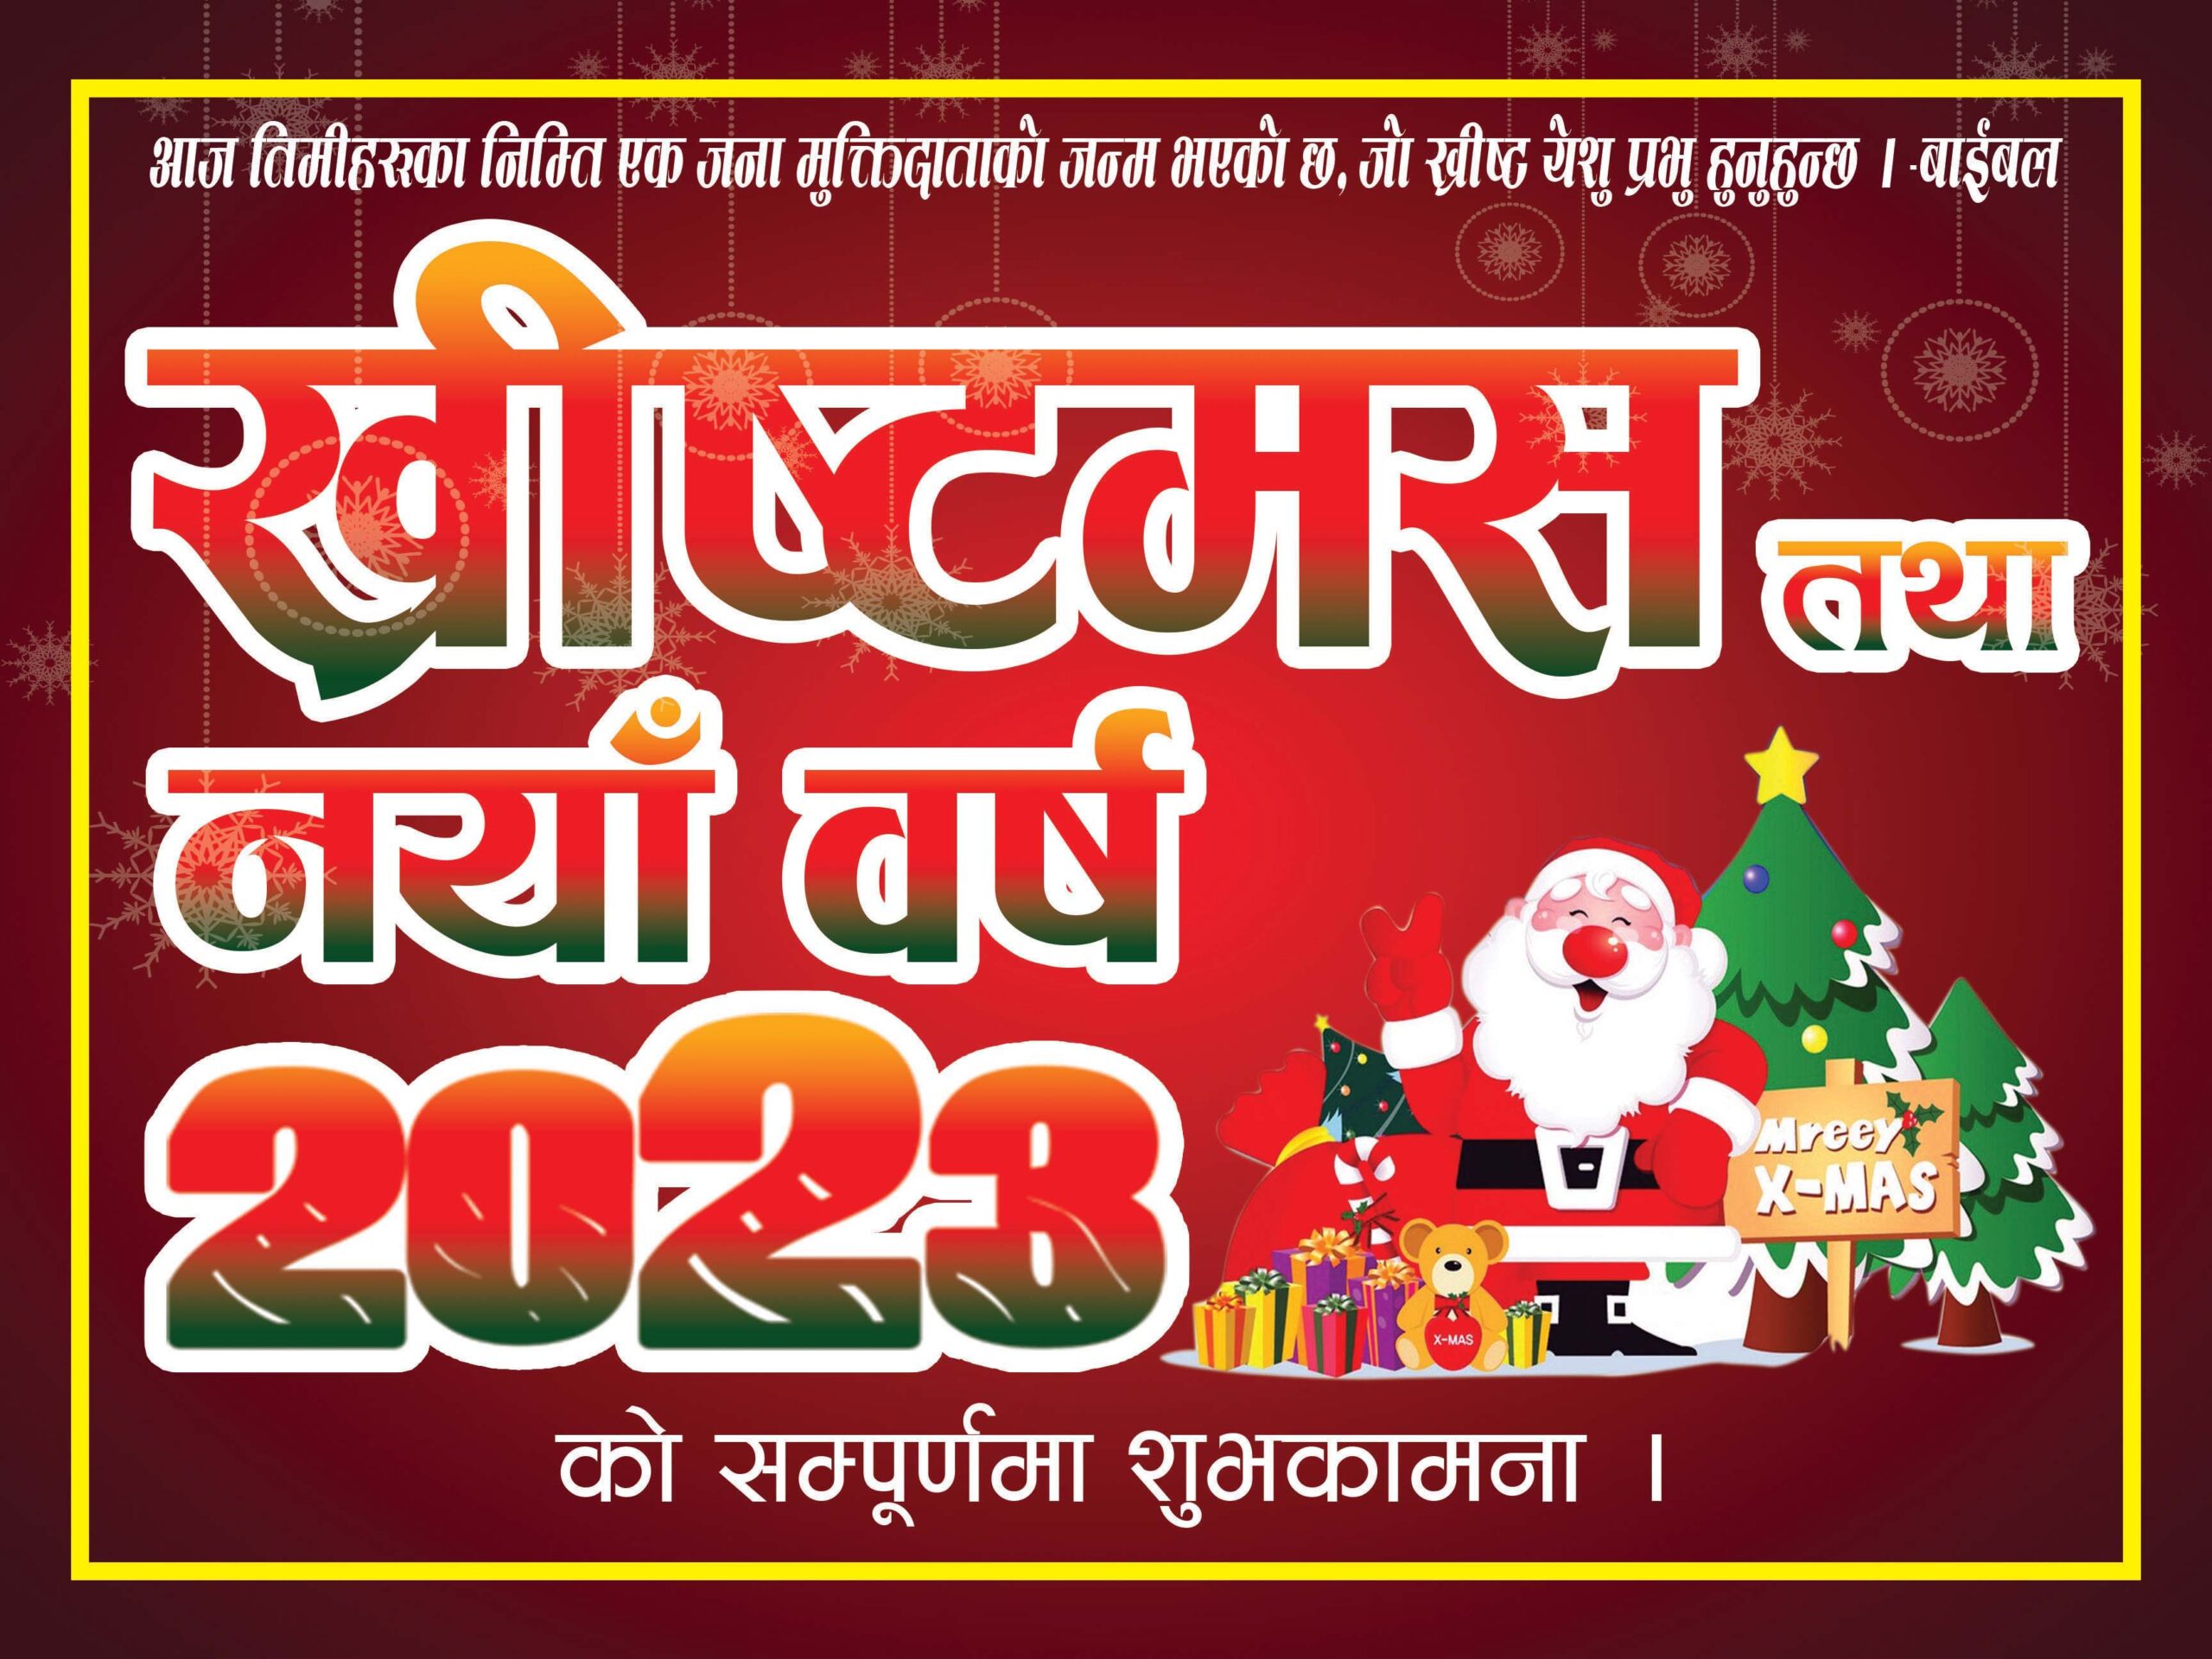 marry Christmas banner design in nepali